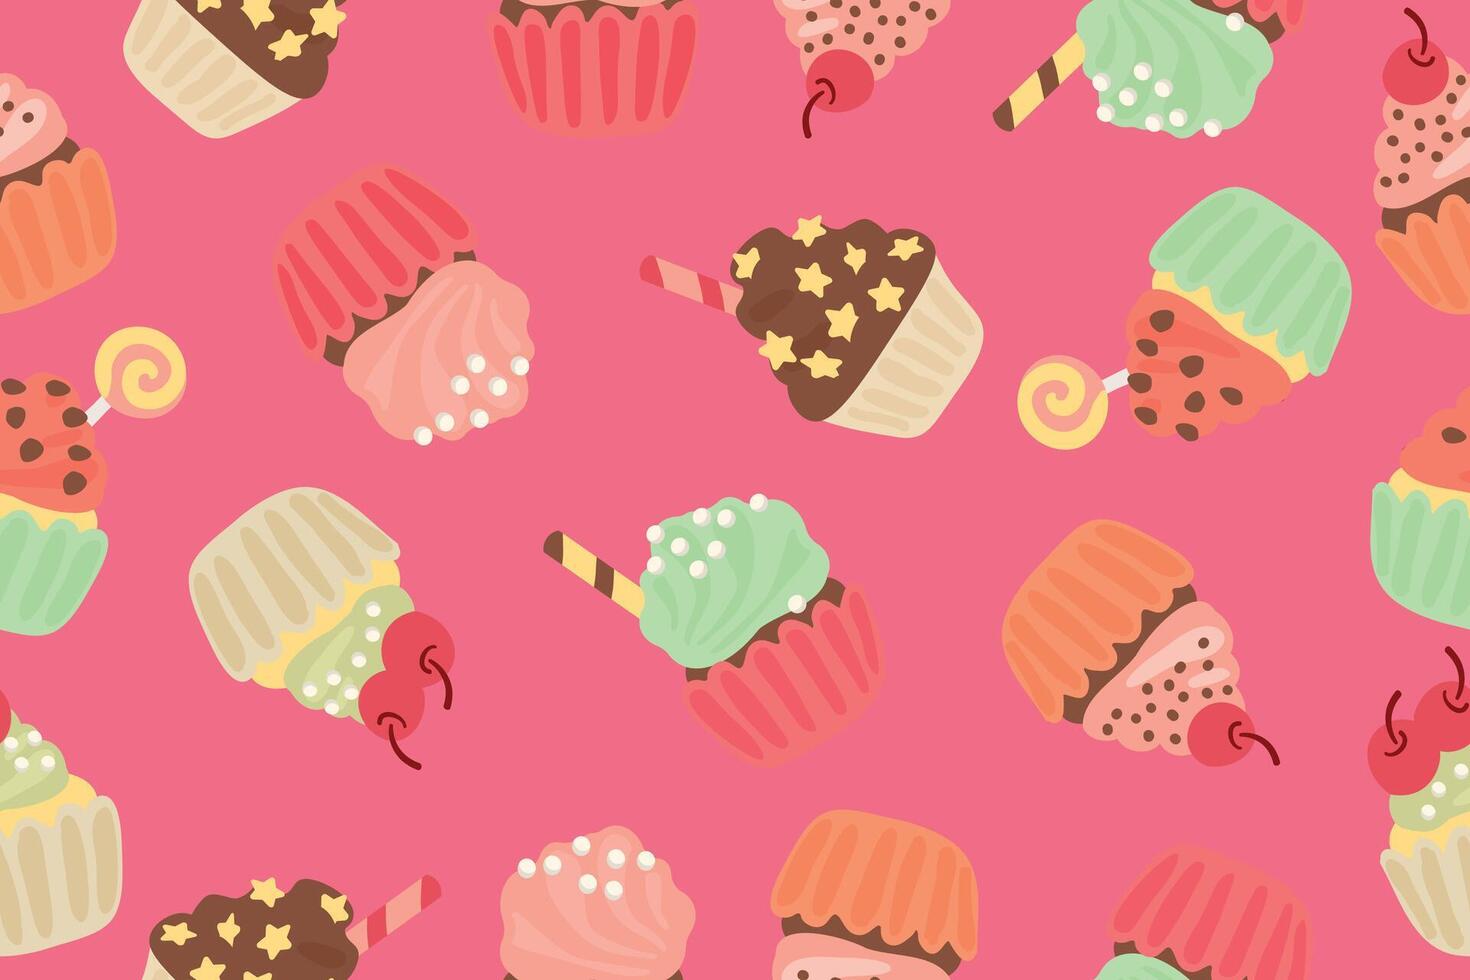 Seamless pattern with sweet cupcakes on a pink background. Sweet pastries with various decorations illustration. vector